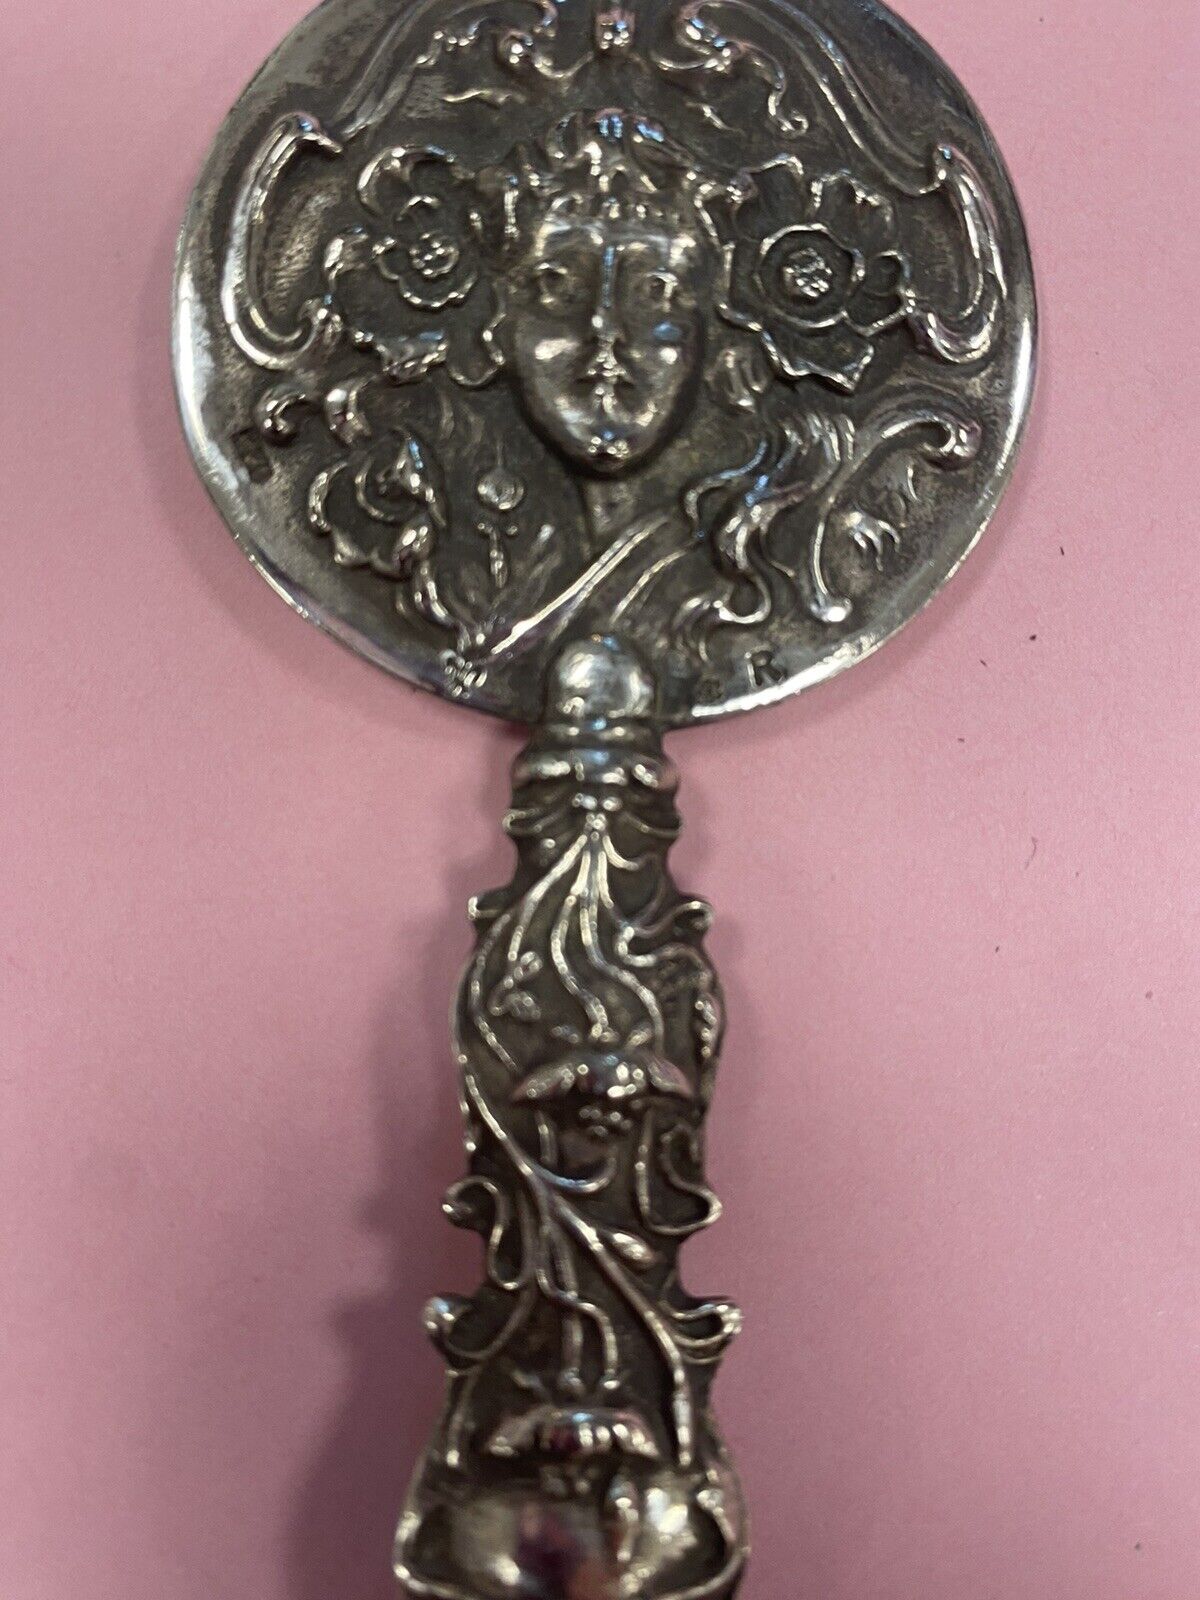 Antique European Sterling Silver Hand Mirror , Woman’s Face